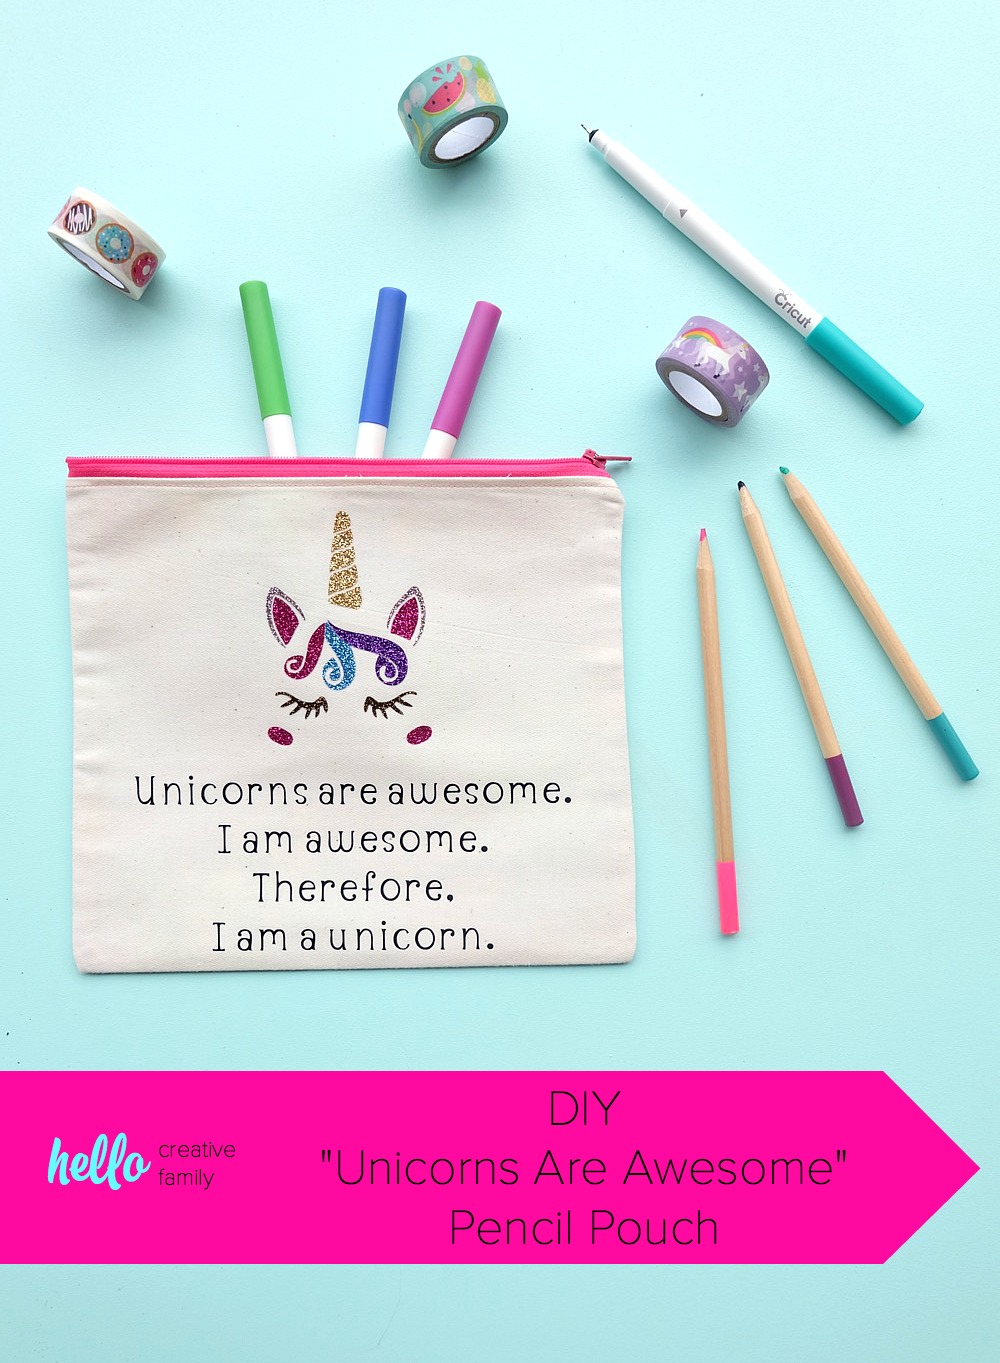 This DIY "Unicorns are awesome. I am awesome. Therefore, I am a unicorn." pencil pouch is just as cute as can be. Includes a step by step sewing tutorial with photos. Would make an adorable makeup bag, pencil pouch or wallet for holding all your treasures in your purse! The perfect handmade gift idea for Christmas or birthdays for the unicorn lover on your list! A fun and easy Cricut Maker project! #Sponsored #Craft #diy #cricutmaker